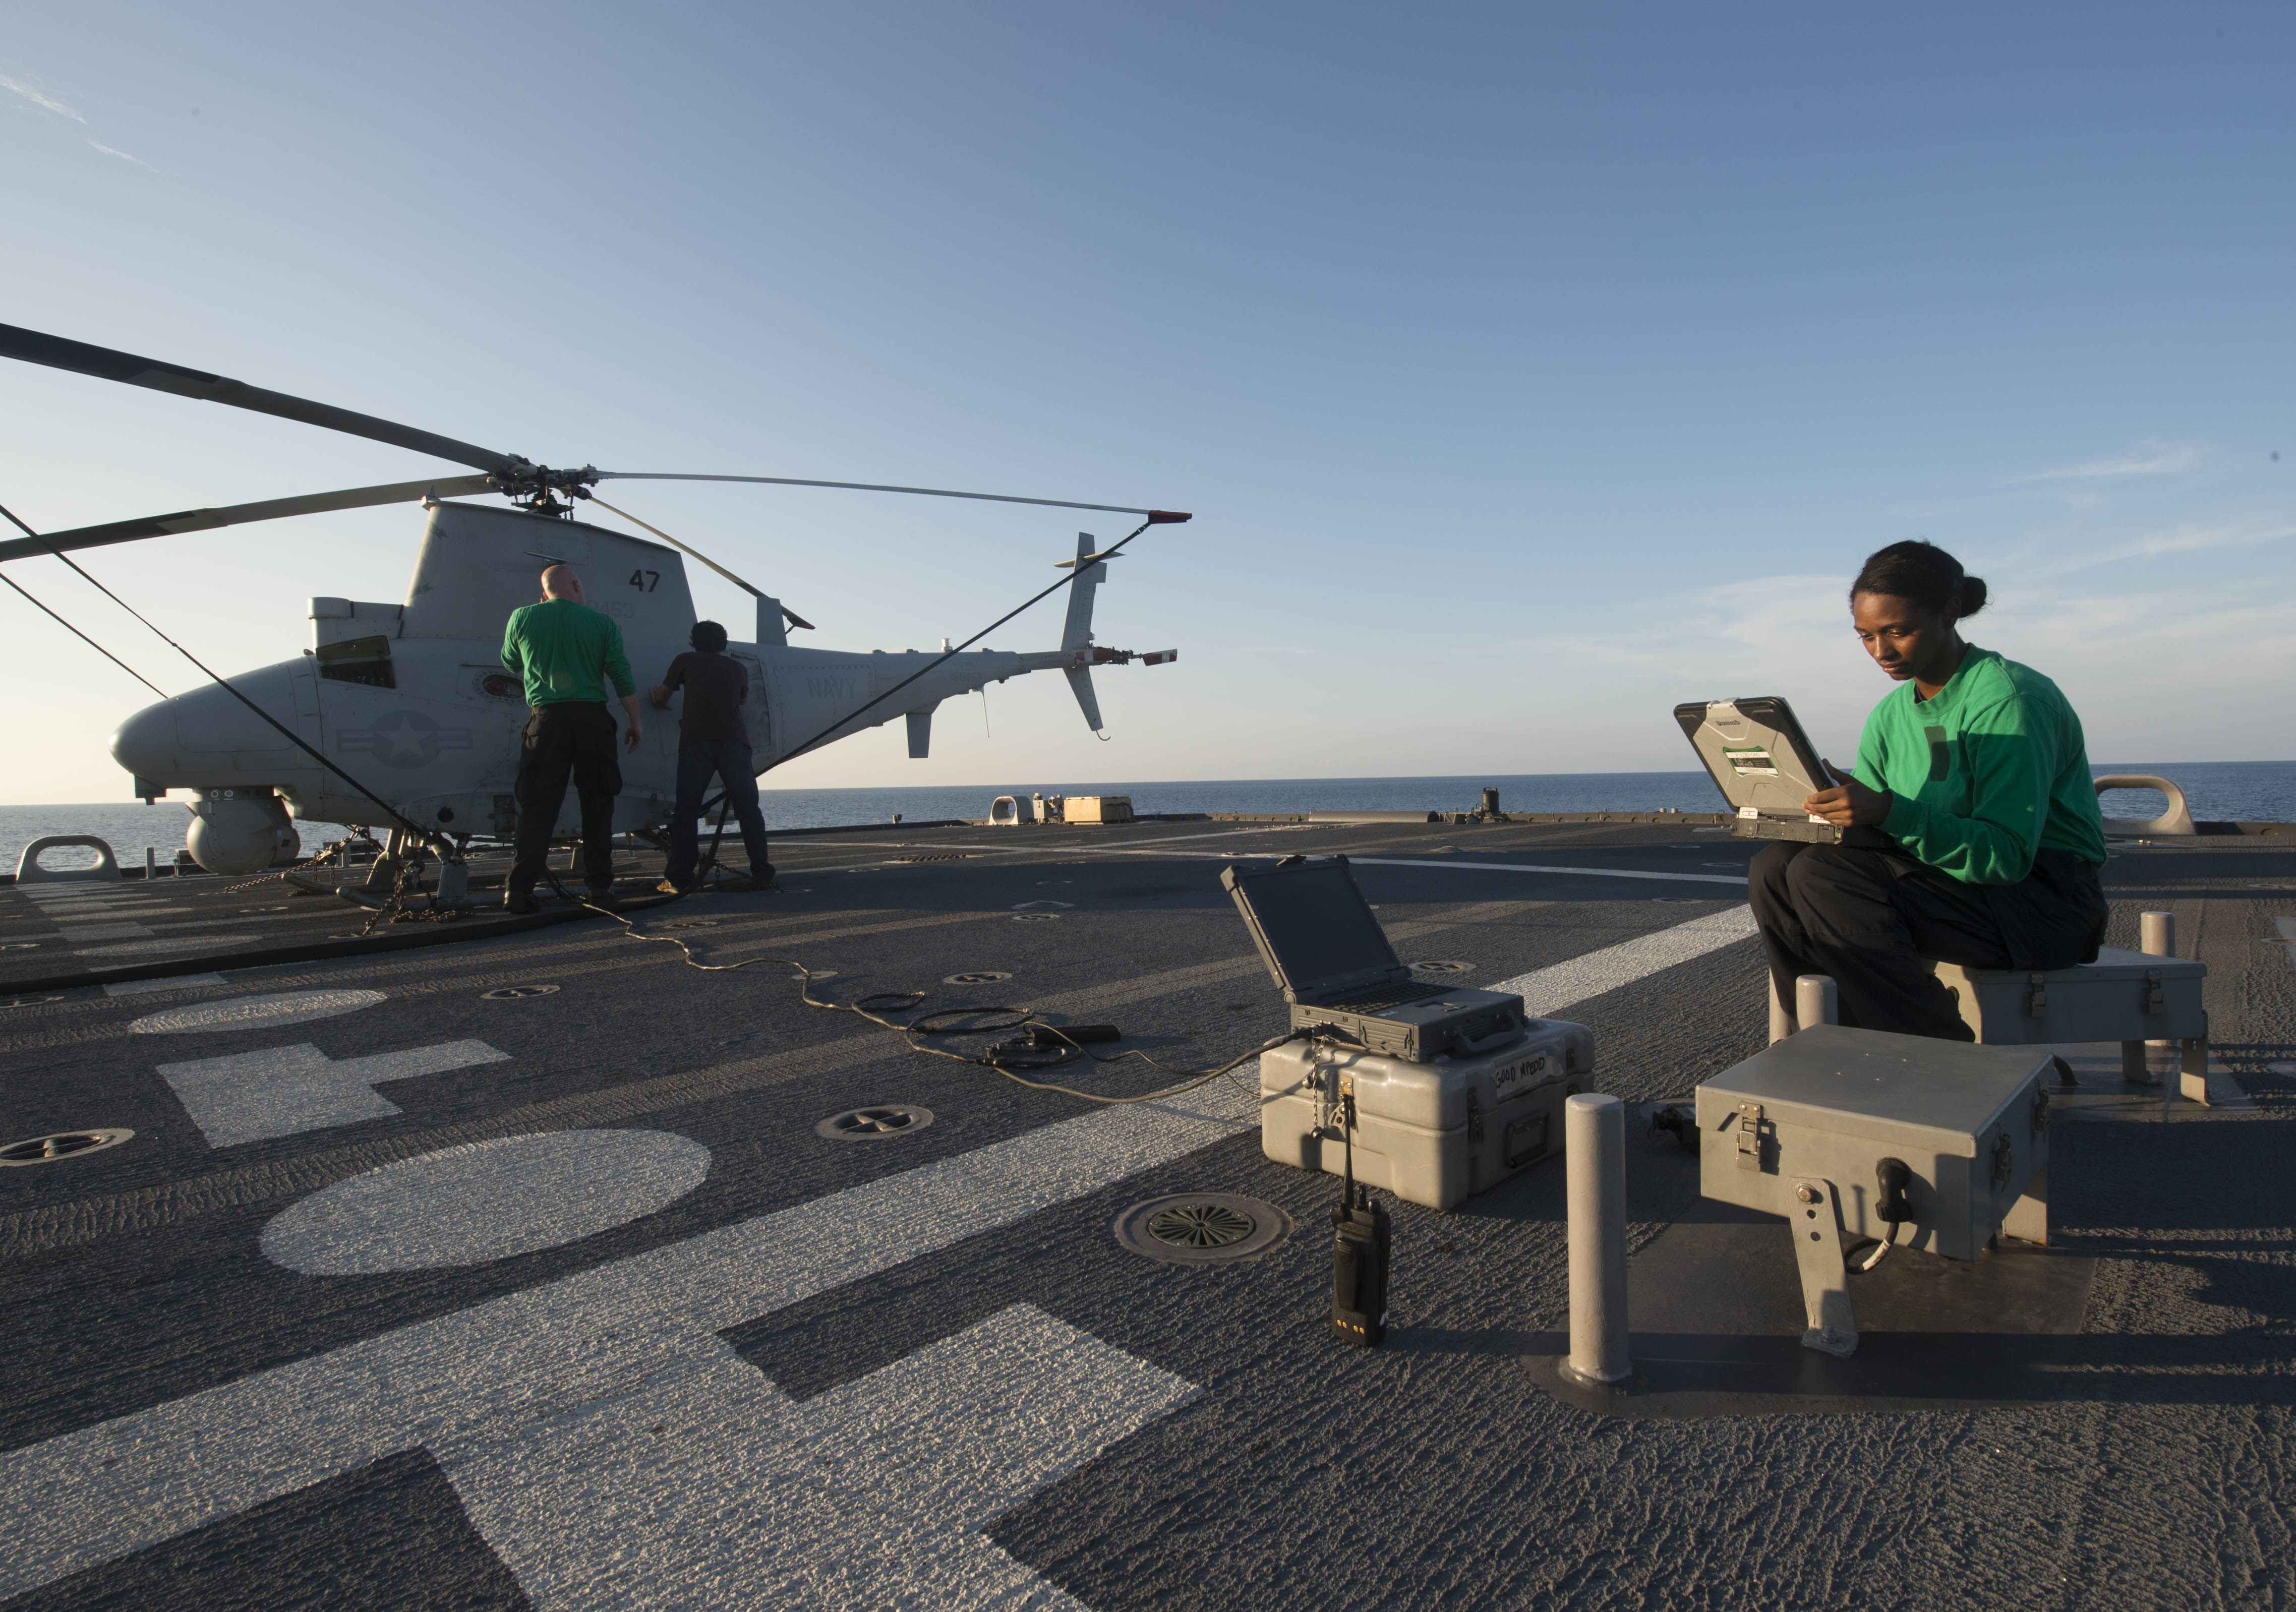 Sailors aboard the littoral combat ship USS Fort Worth (LCS 3) prepare to launch an MQ-8B Fire Scout unmanned aircraft system on Aug. 15, 2015. US Navy photo.